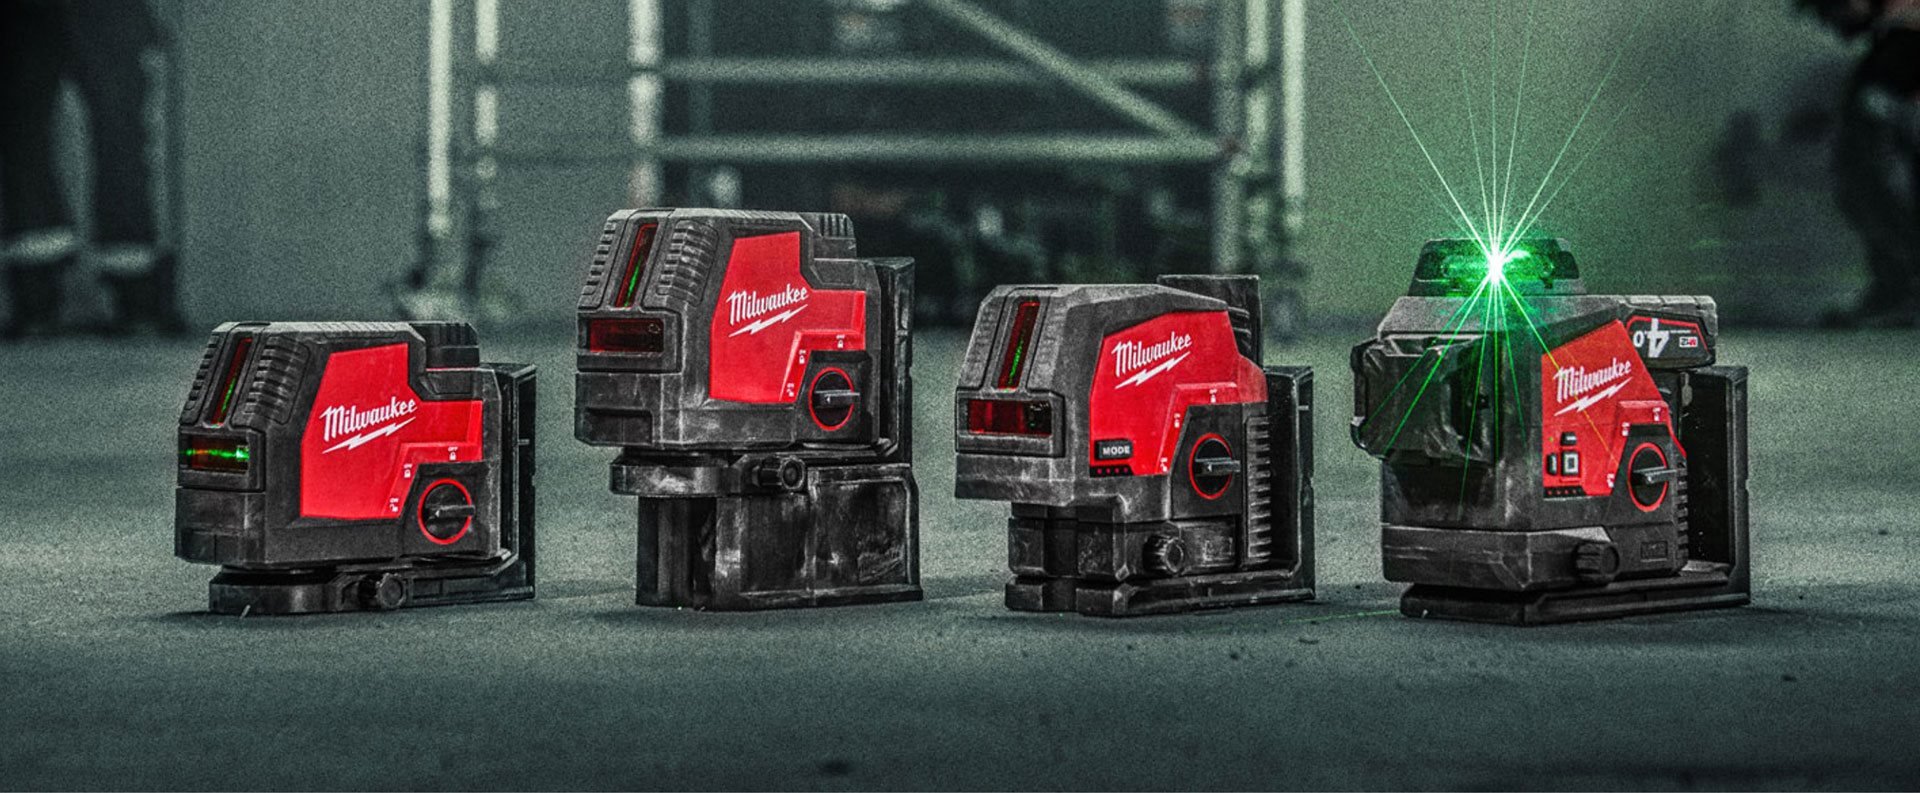 MILWAUKEE® Power Tools UK Official Site